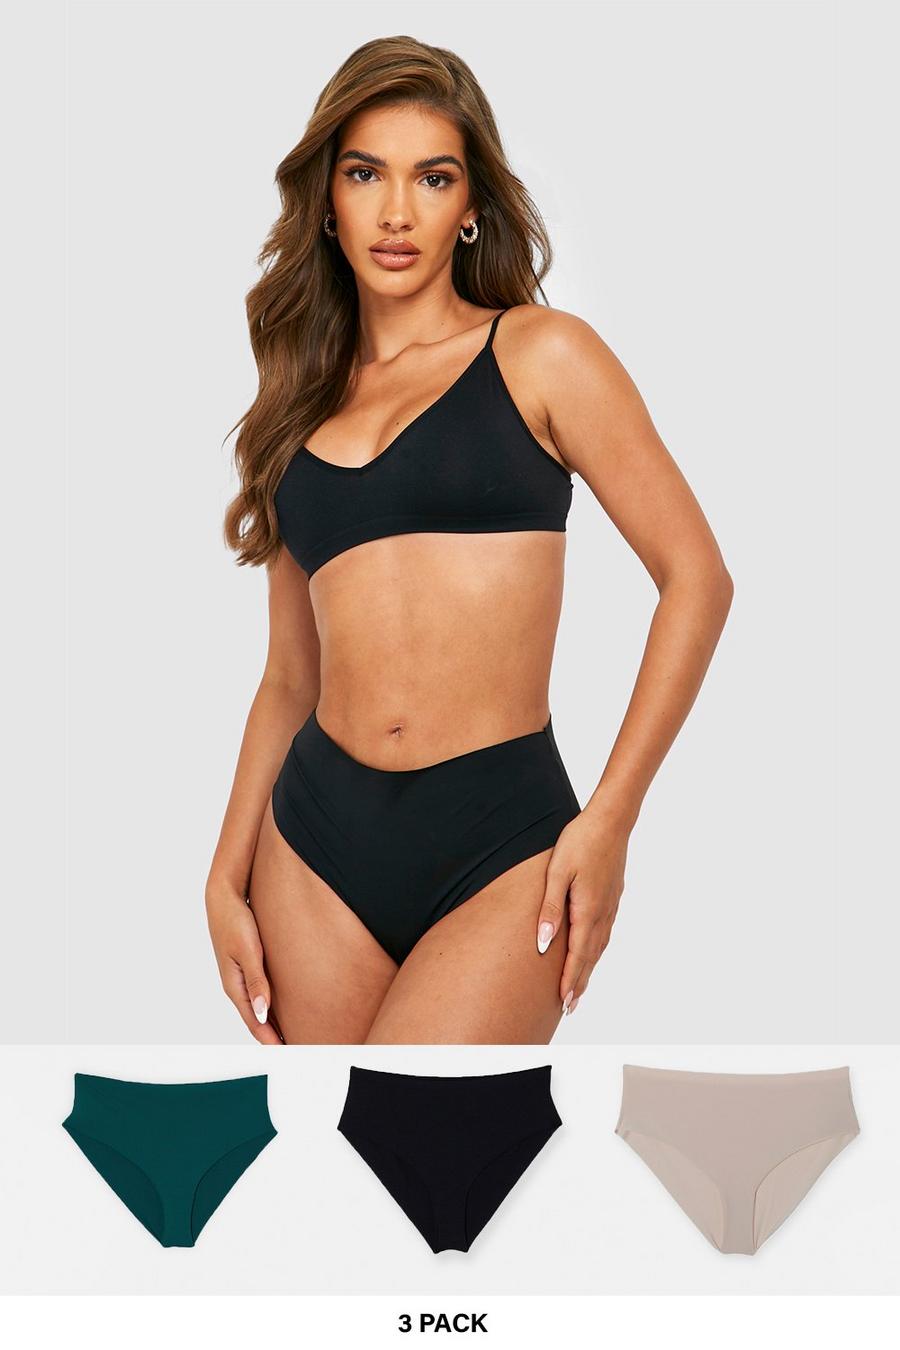 Black XS discount 63% In Extenso Thong and panties WOMEN FASHION Underwear & Nightwear Thong and panties 